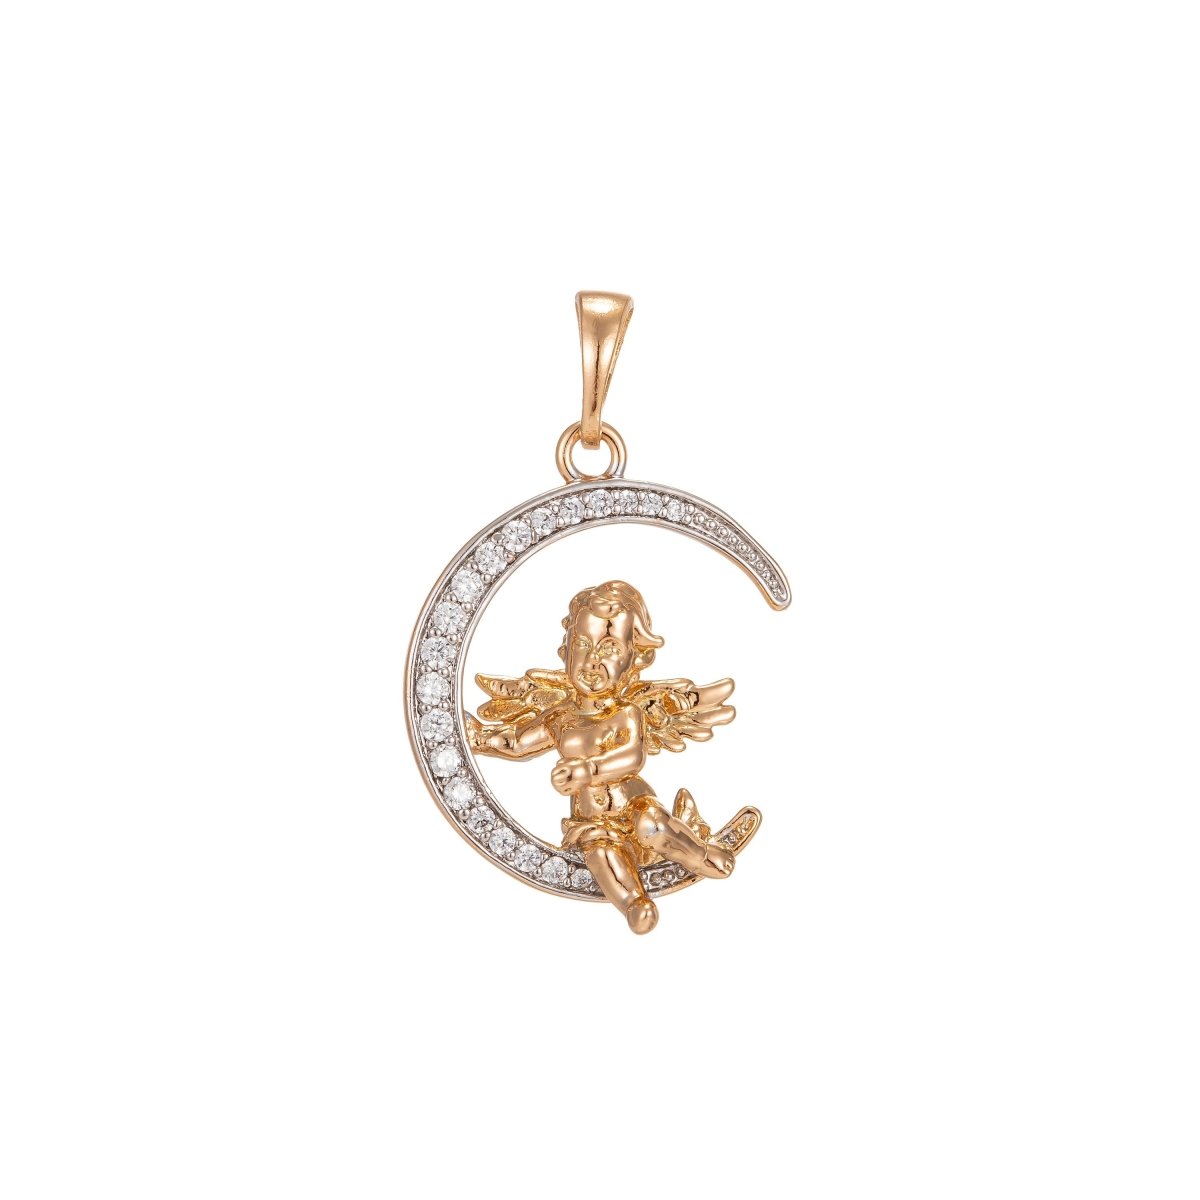 Cherub in the Moon Pendant Micro Pave Gold Moon Charm Necklace Moon Pendant in 18k Gold Filled Cherub Necklace Cubic Baby Angel Jewelry I-251 - DLUXCA